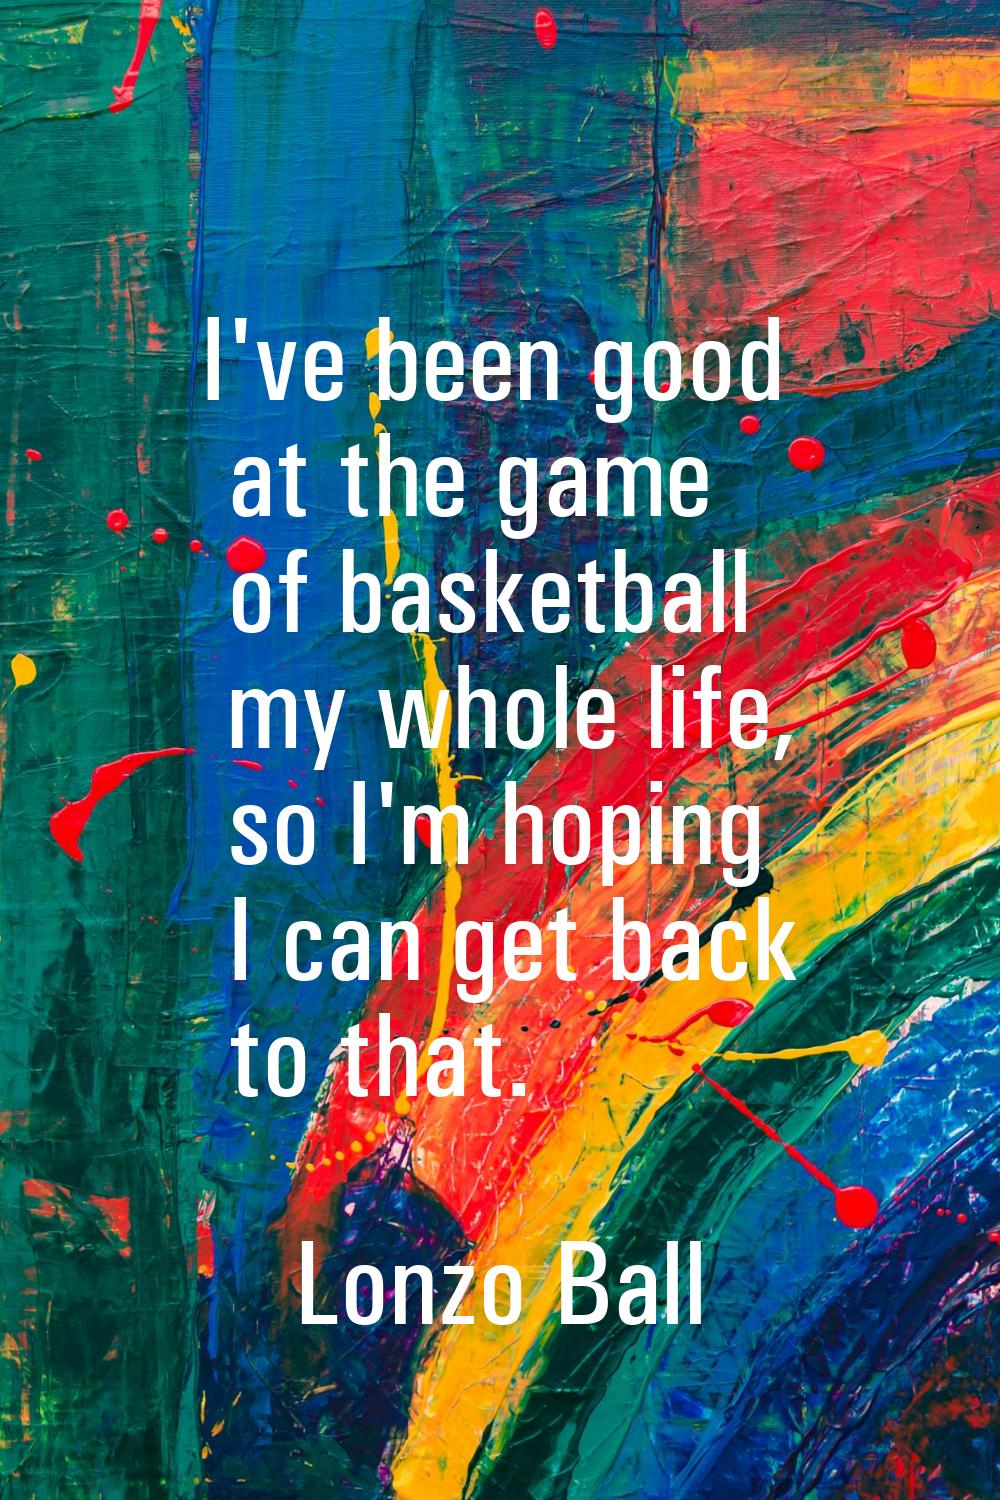 I've been good at the game of basketball my whole life, so I'm hoping I can get back to that.